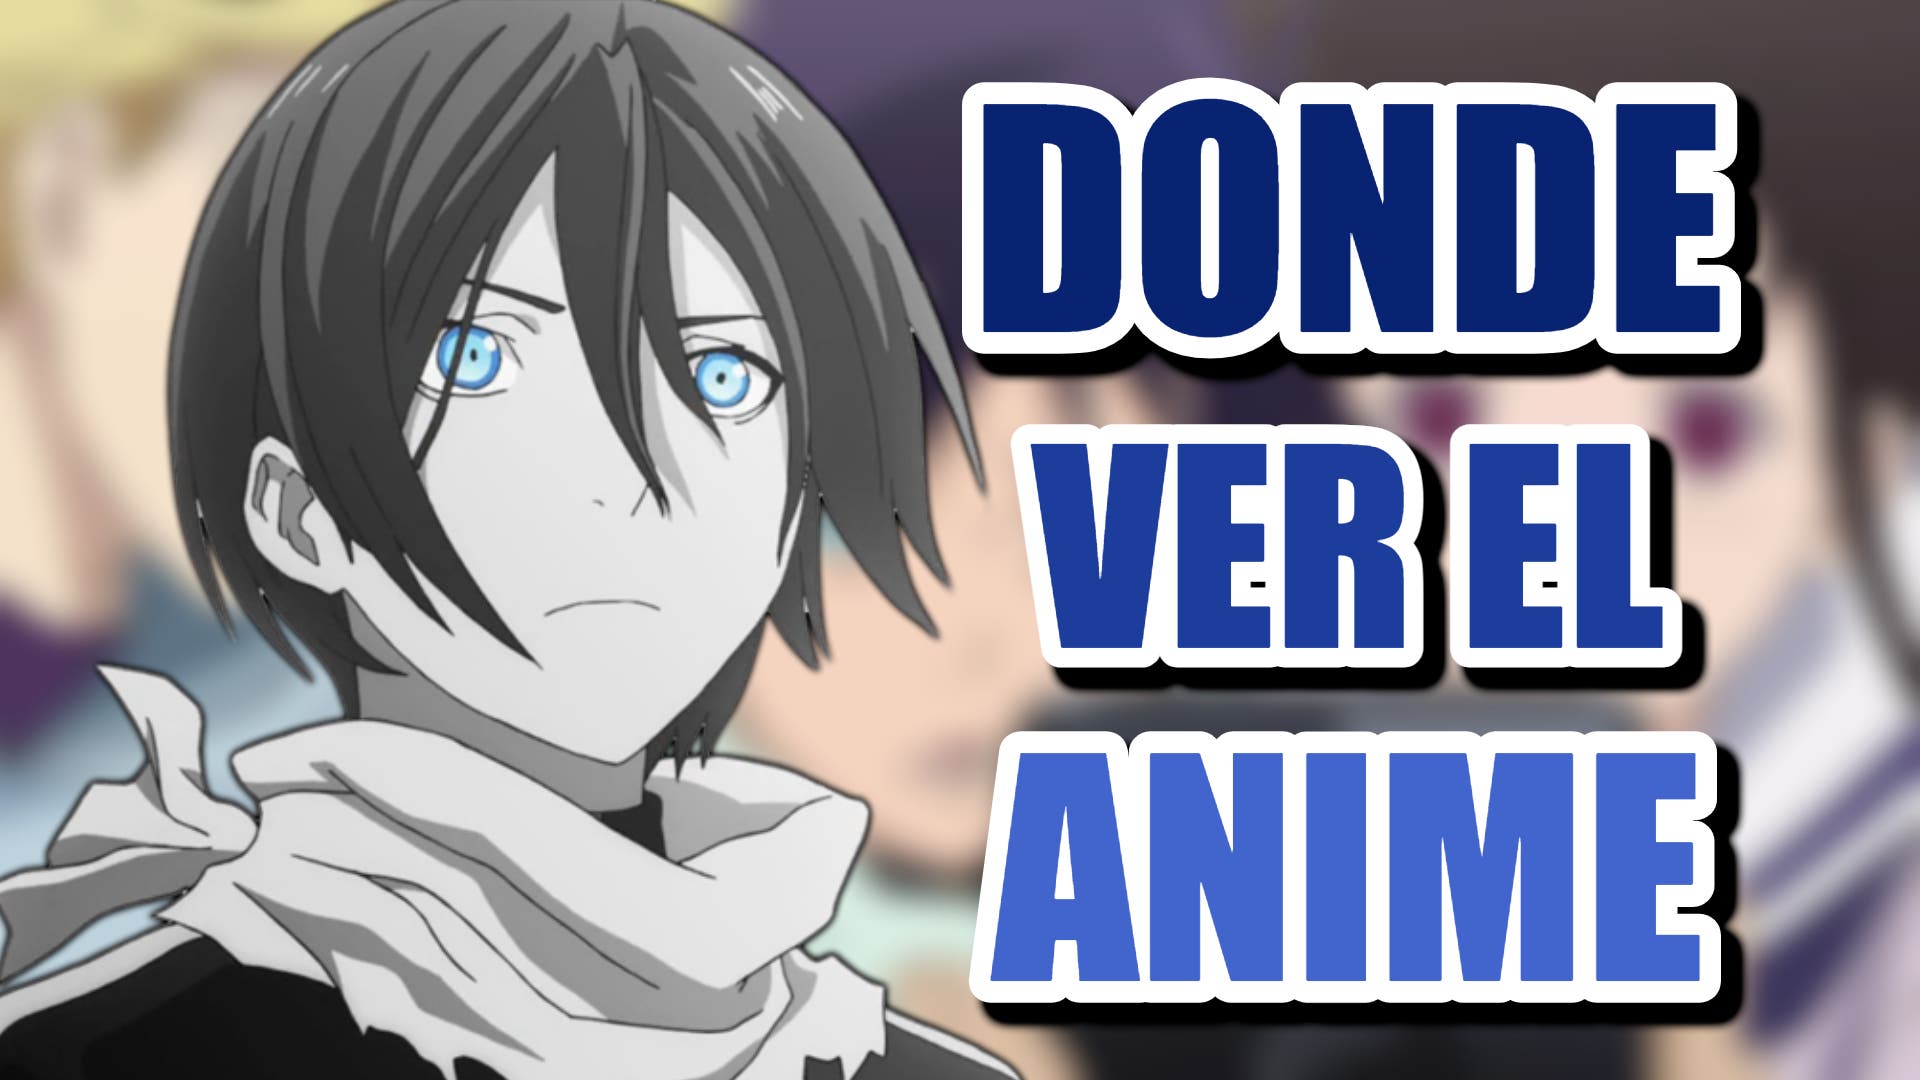 Noragami: where to see the anime of Yato and company in full